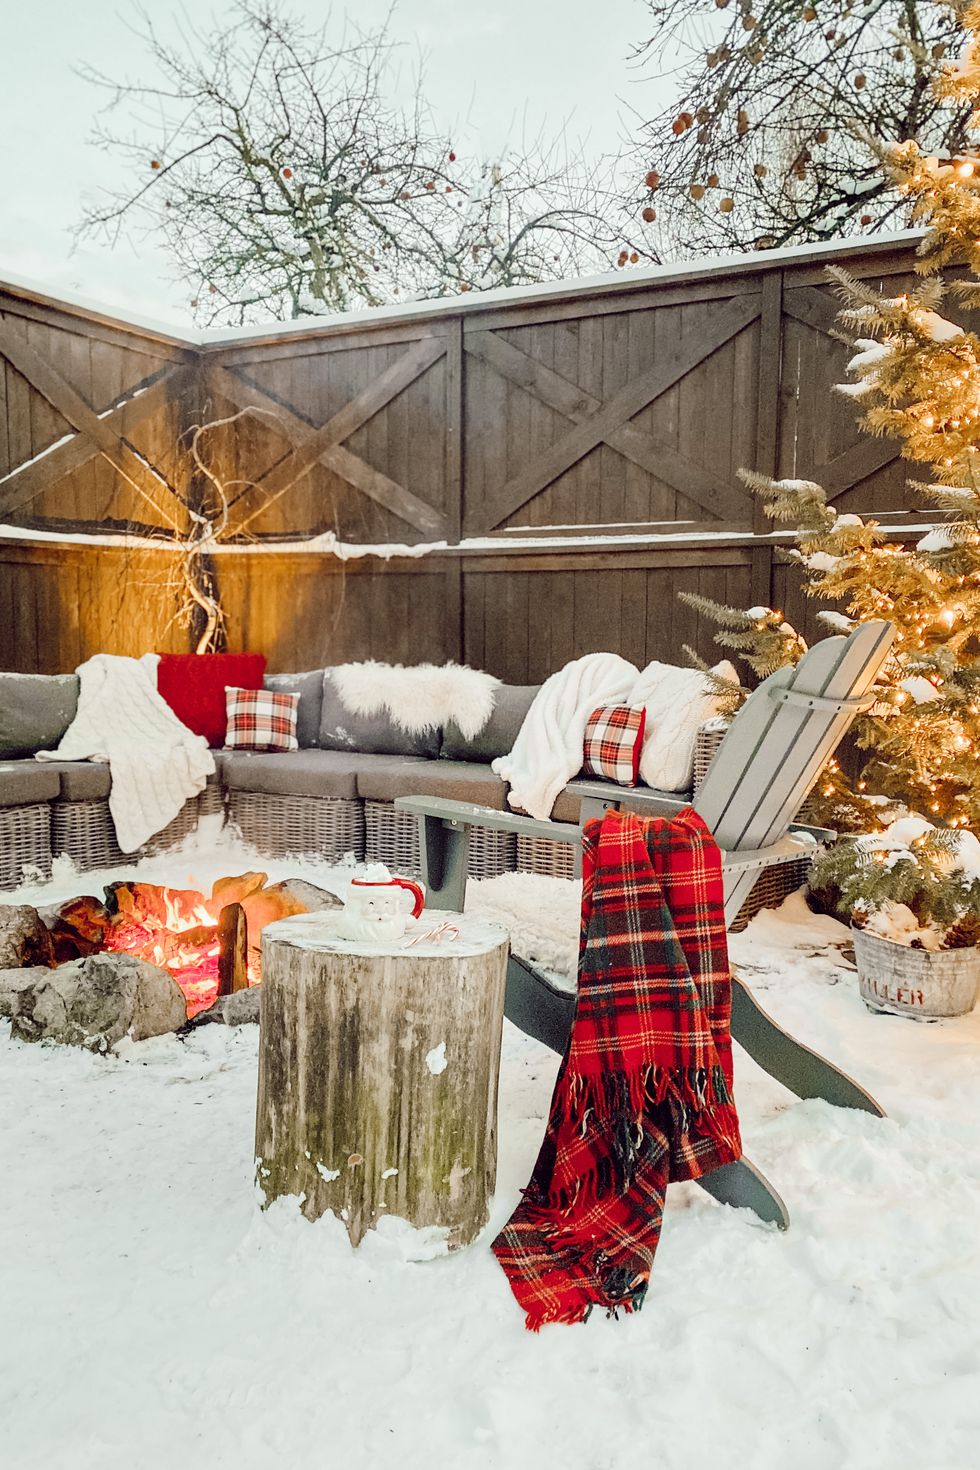 an outdoor space in the winter decorated with holiday decor